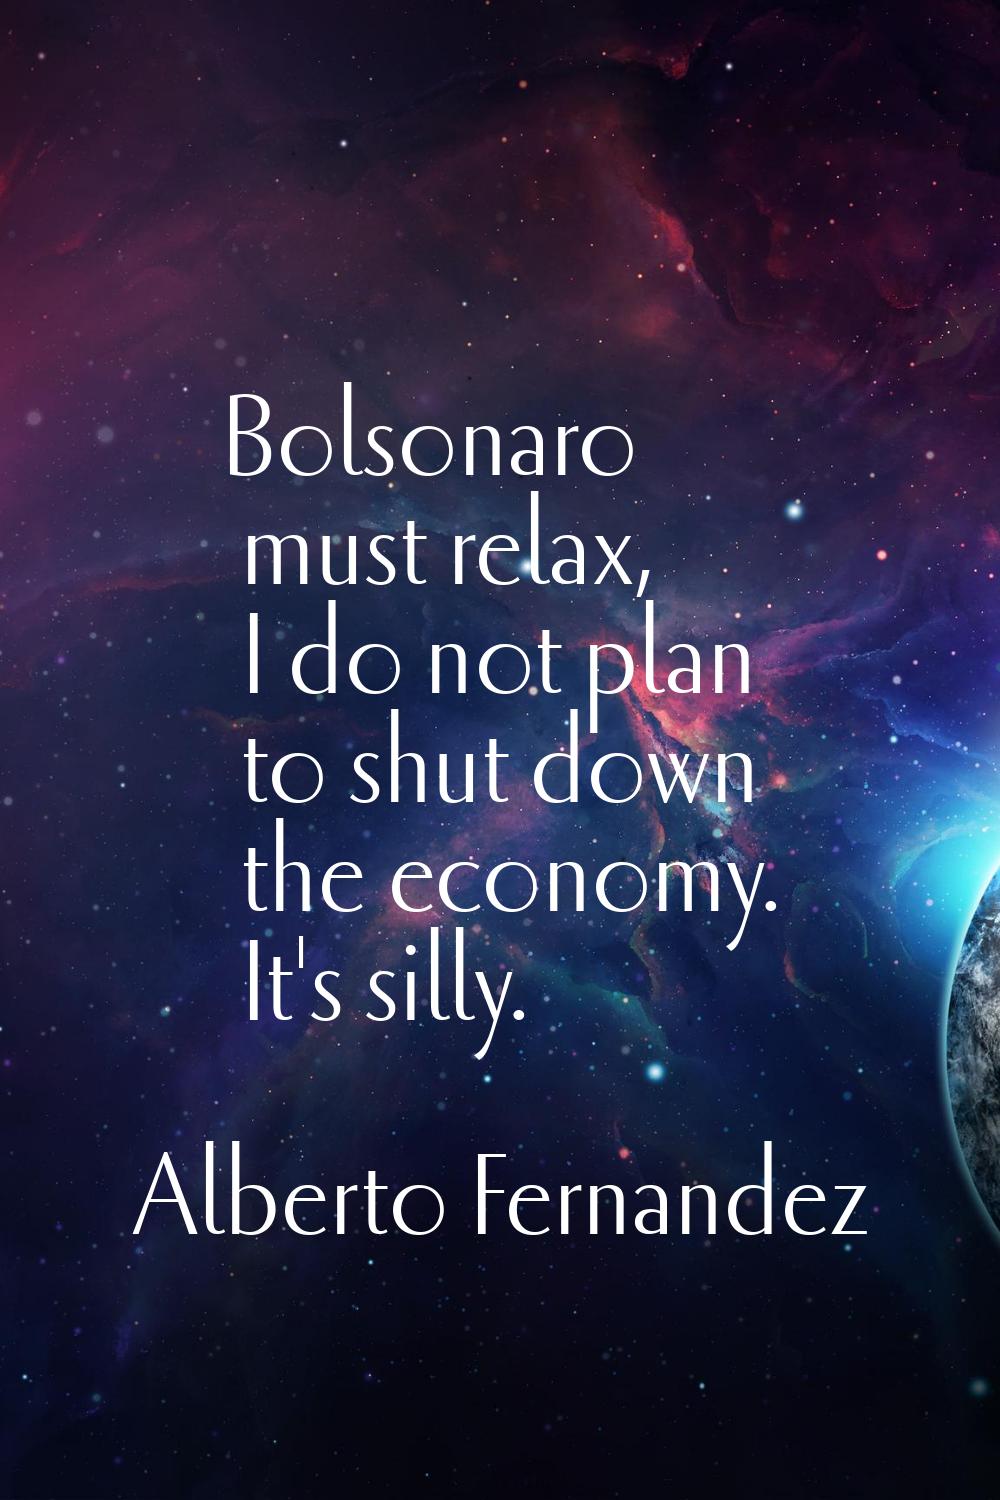 Bolsonaro must relax, I do not plan to shut down the economy. It's silly.